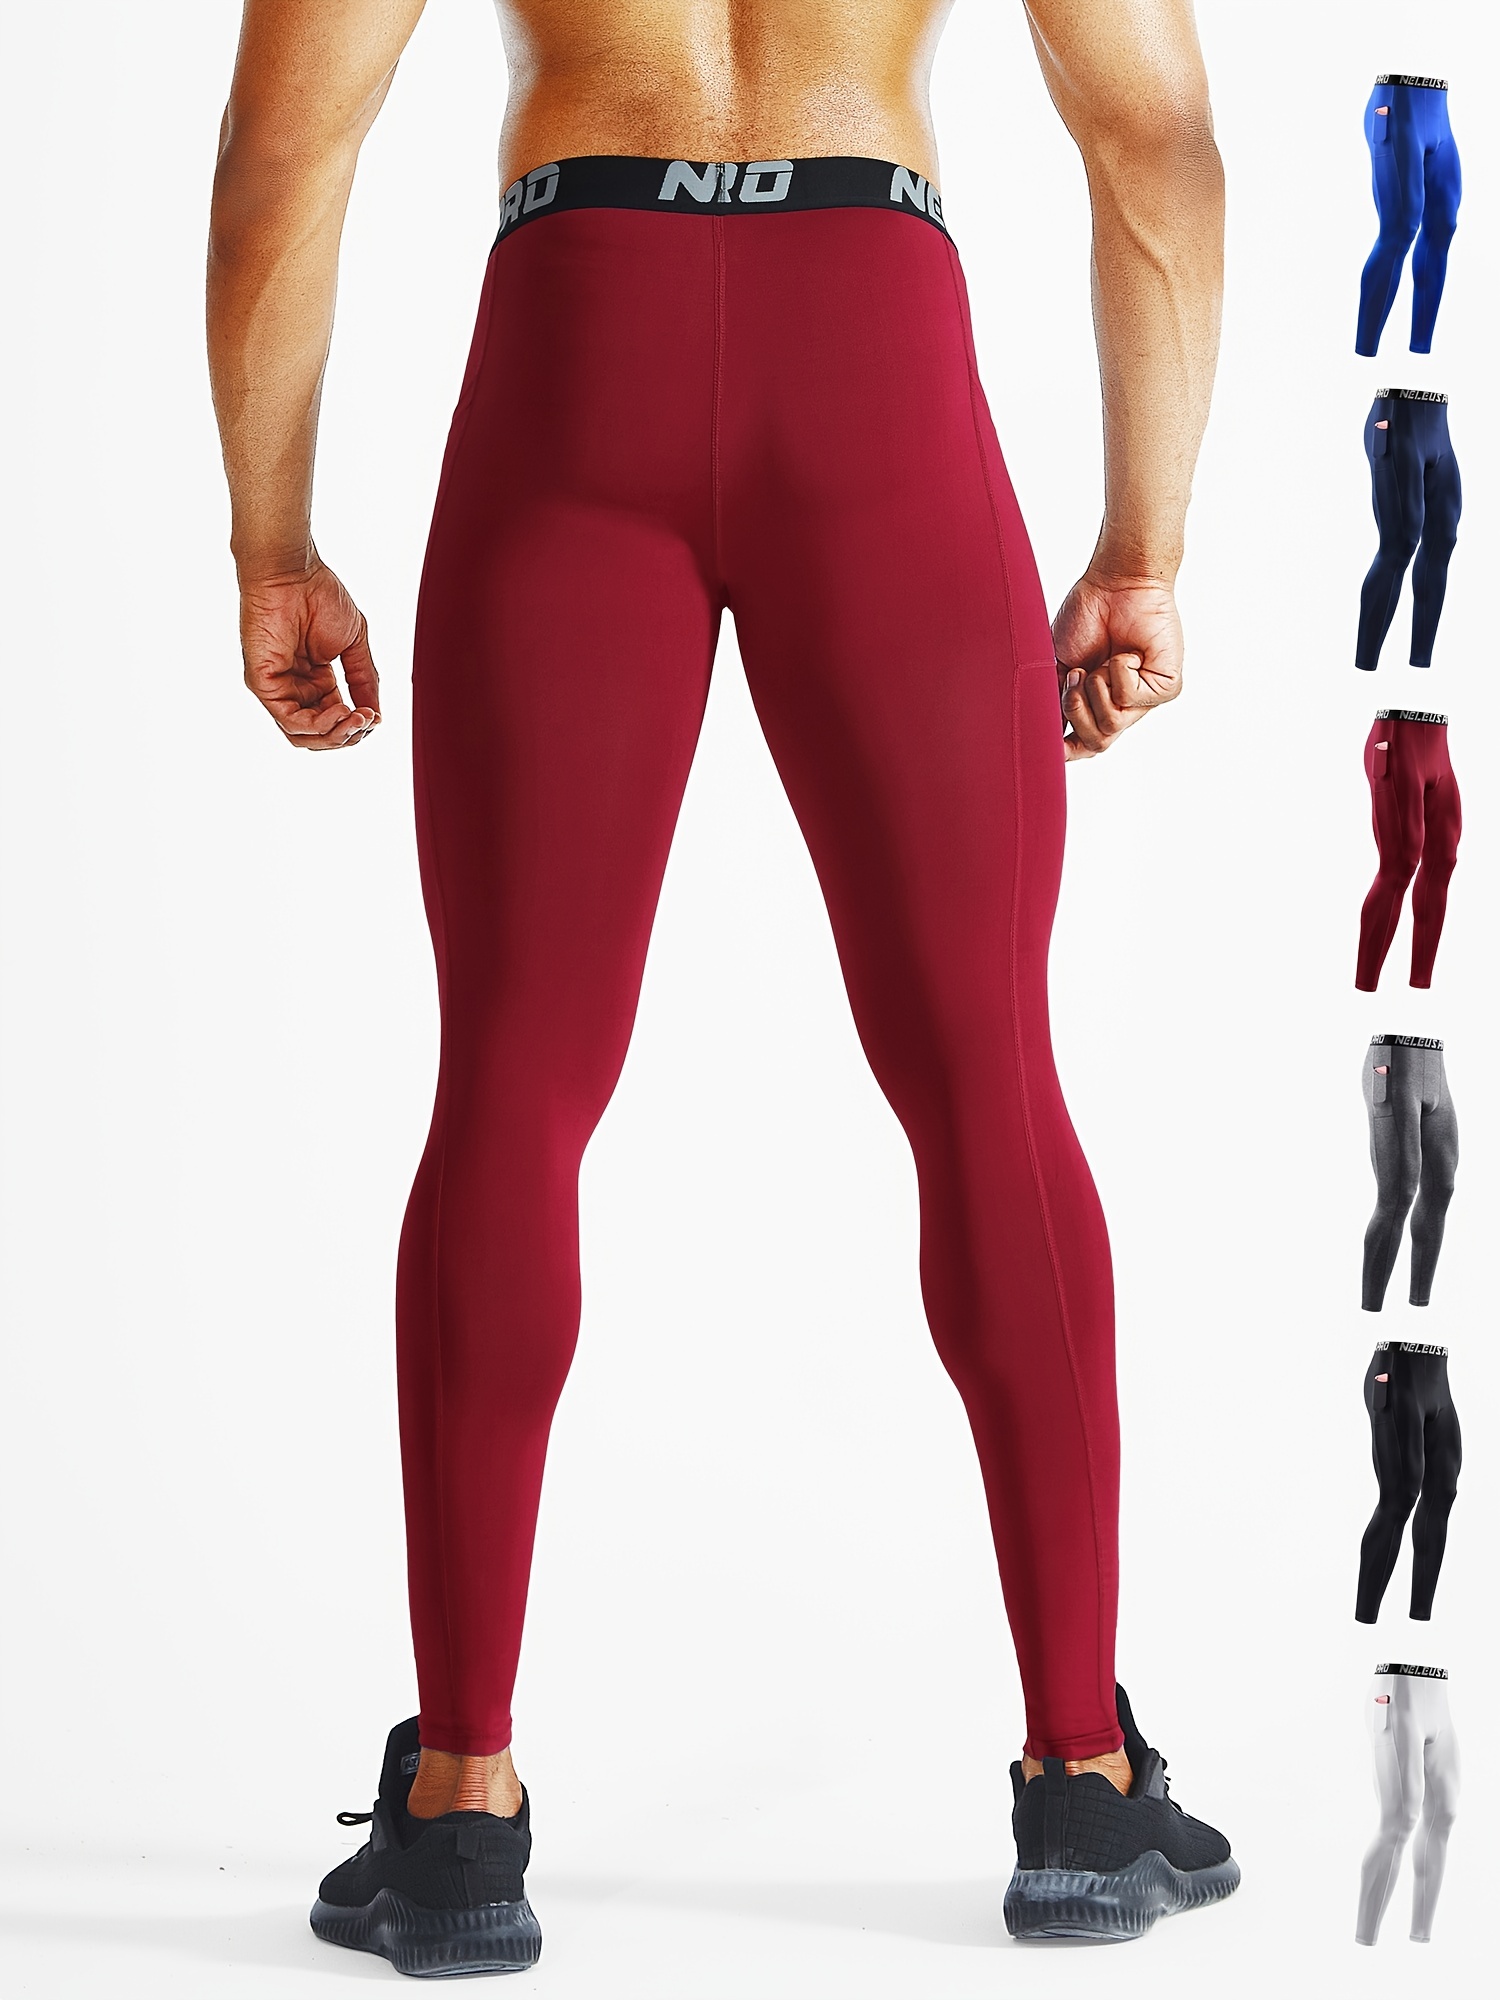 Men Fashion Pocket pants Sports Leggings Compression Pants Jogging Running  Fitness Exercise Gym Tights Trousers Sportswear Pocket Quick Dry